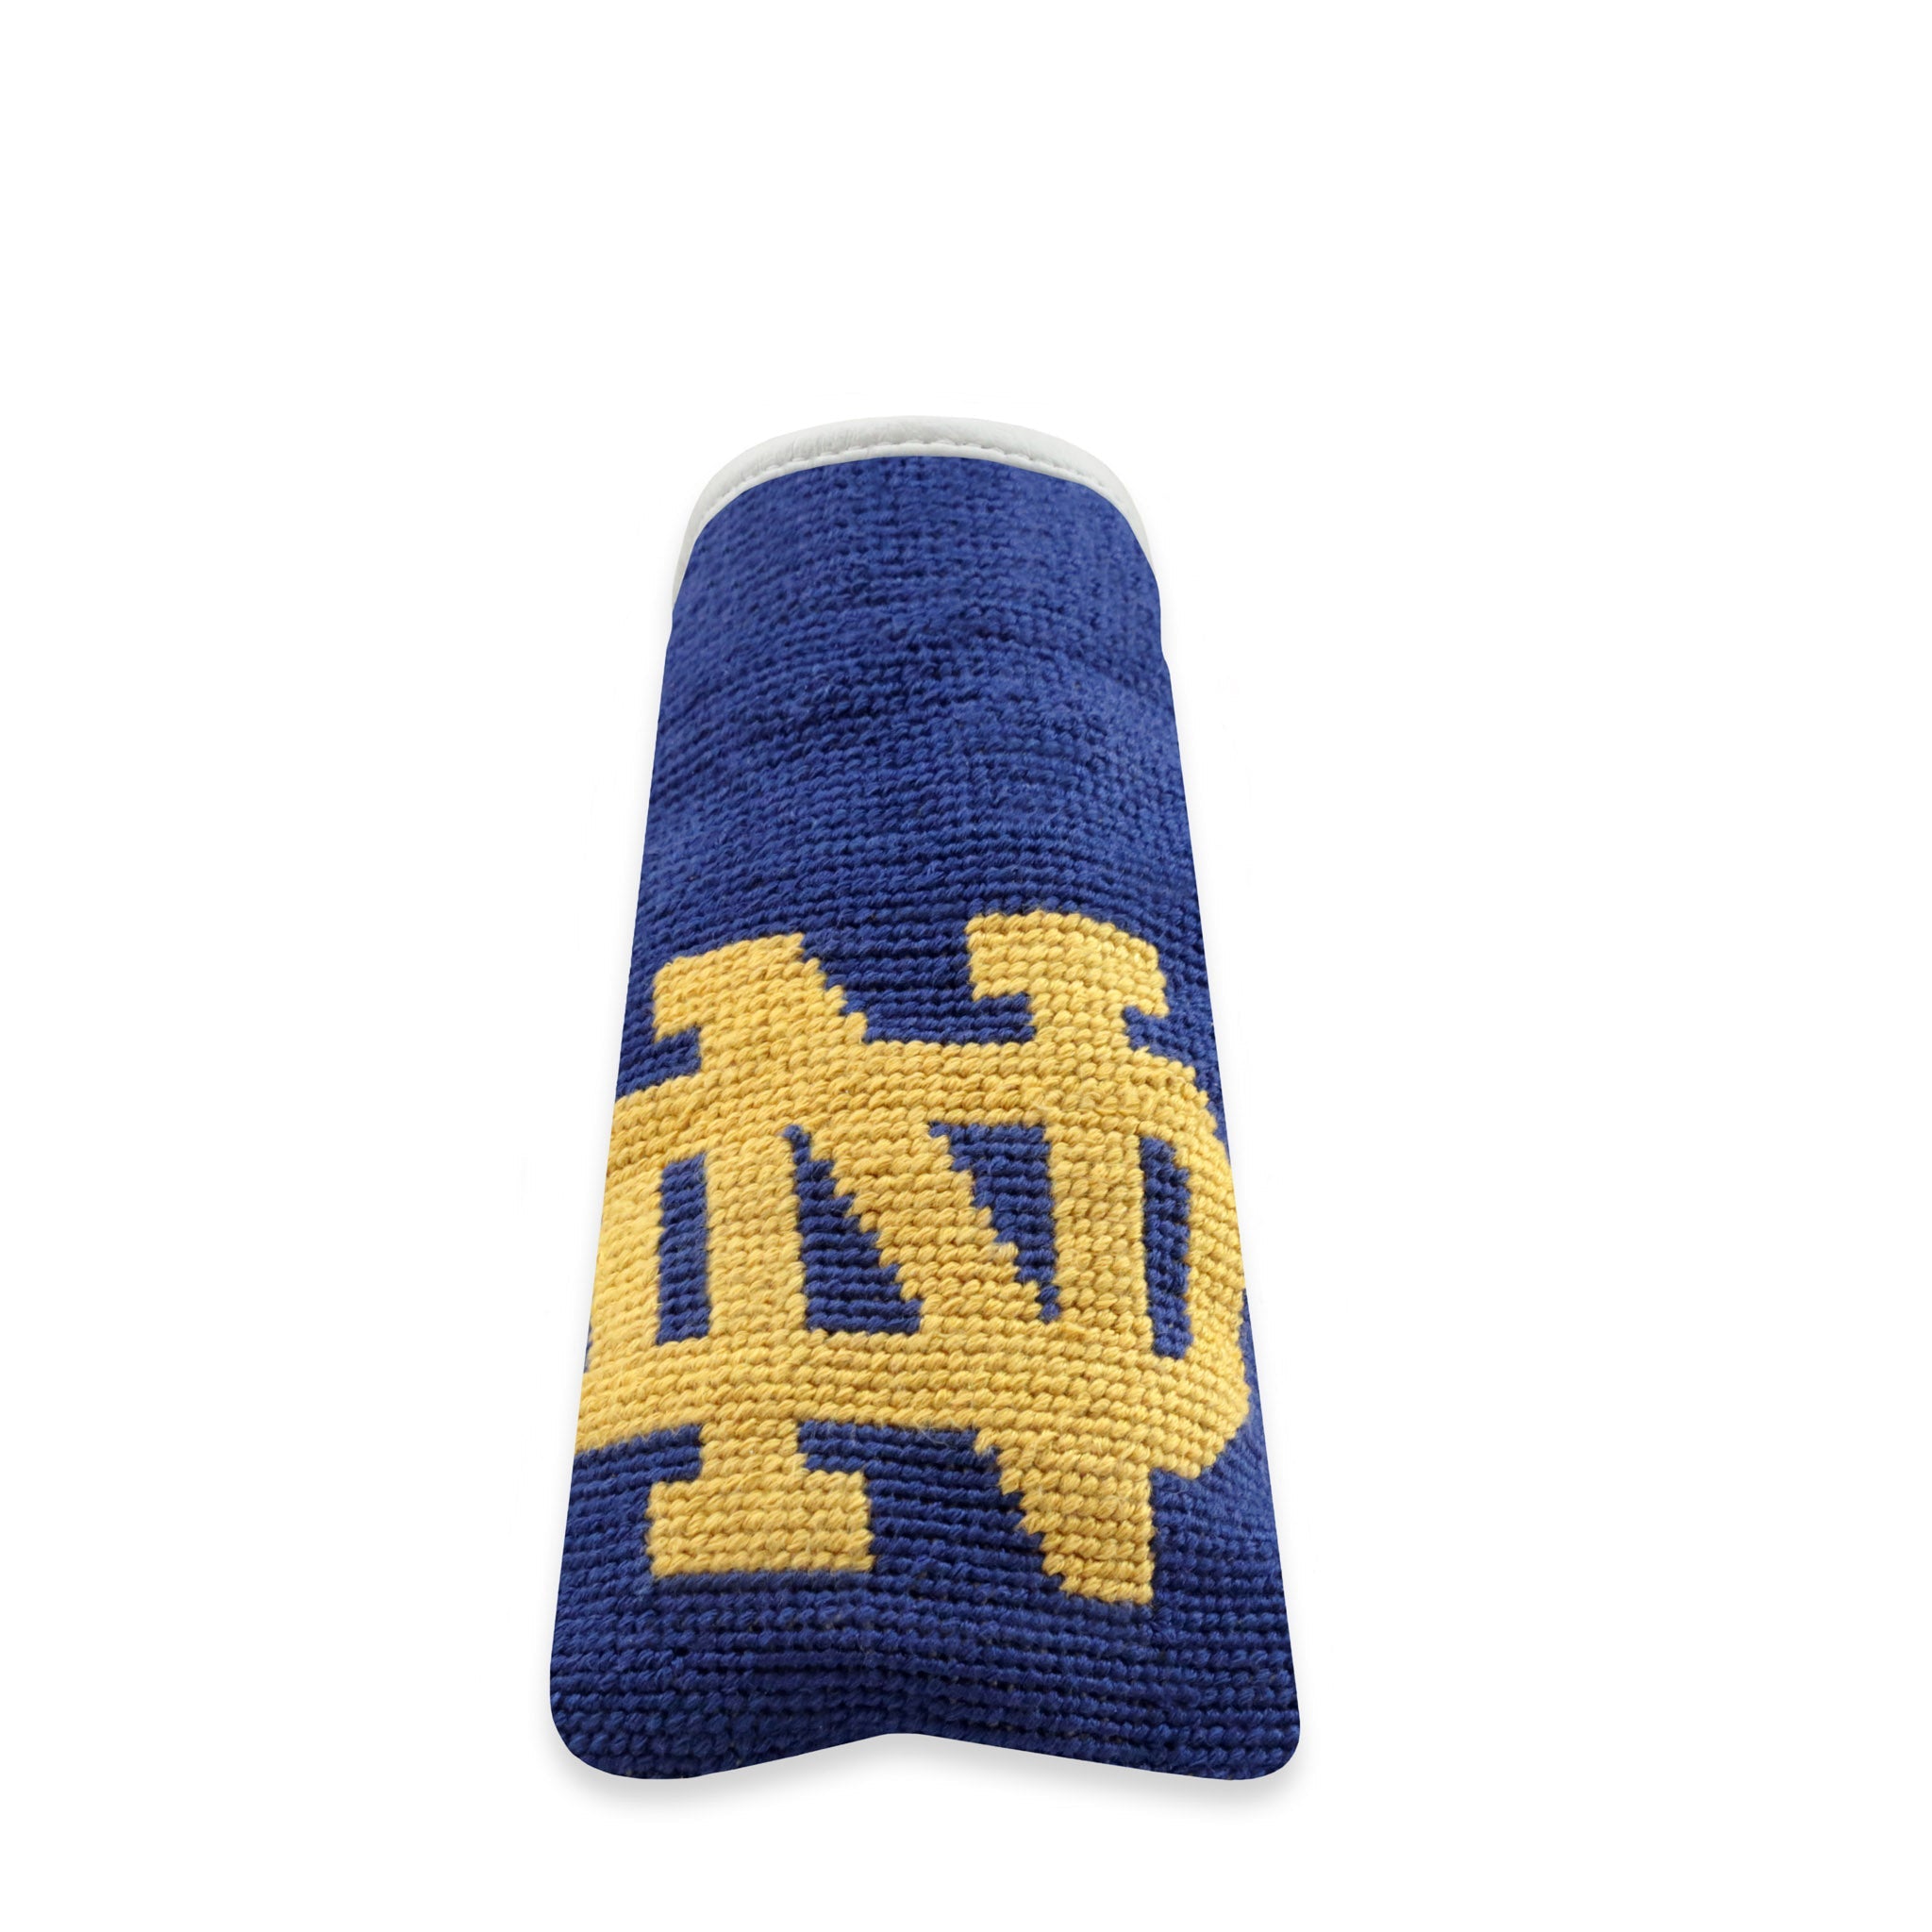 Smathers and Branson Notre Dame Needlepoint Putter Headcover   